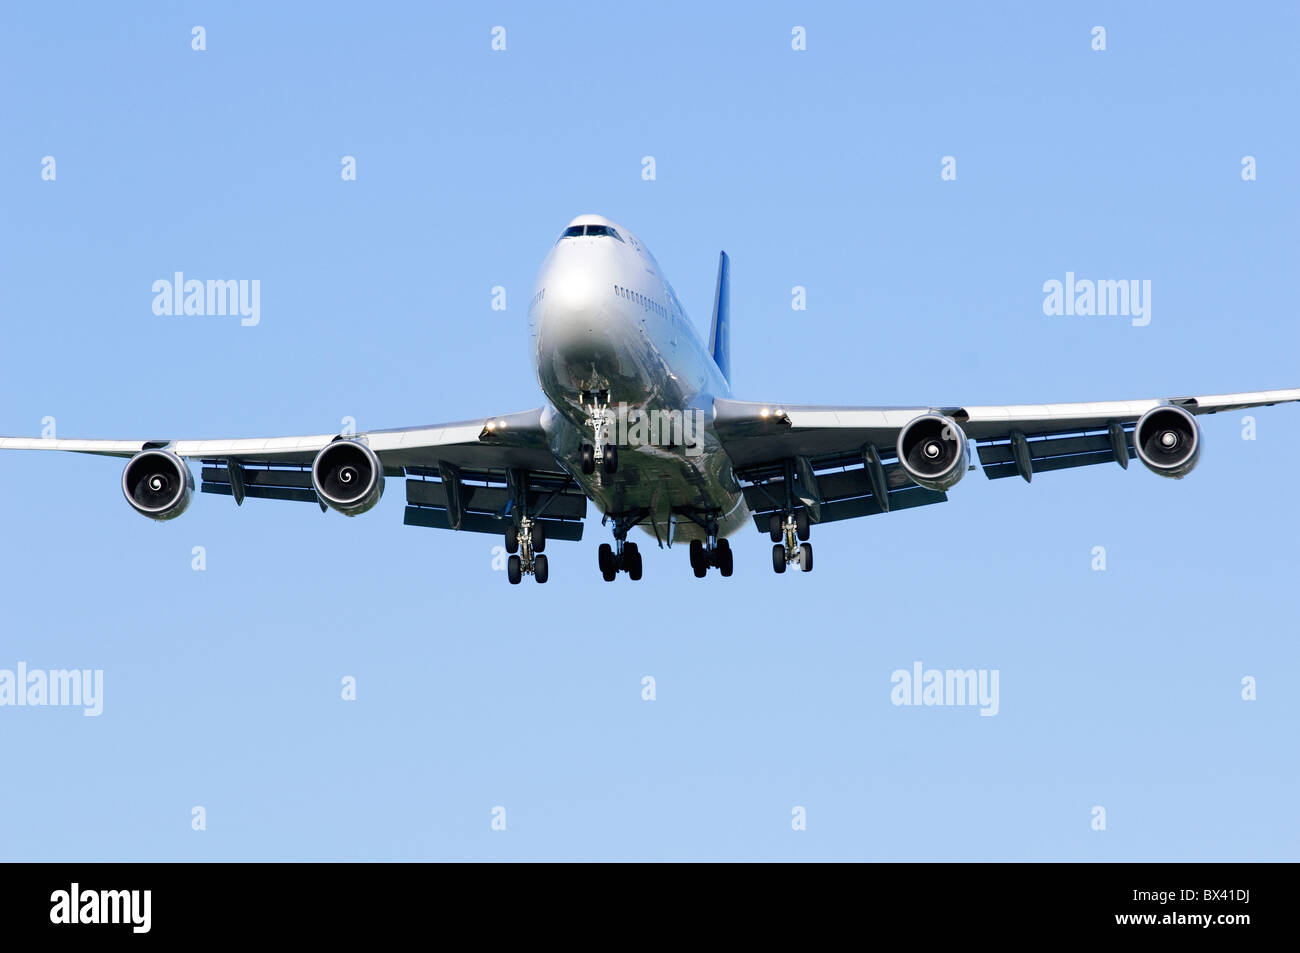 Boeing 747 Jumbo Jet operated Thai Airways on approach for landing at London Heathrow Airport Stock Photo